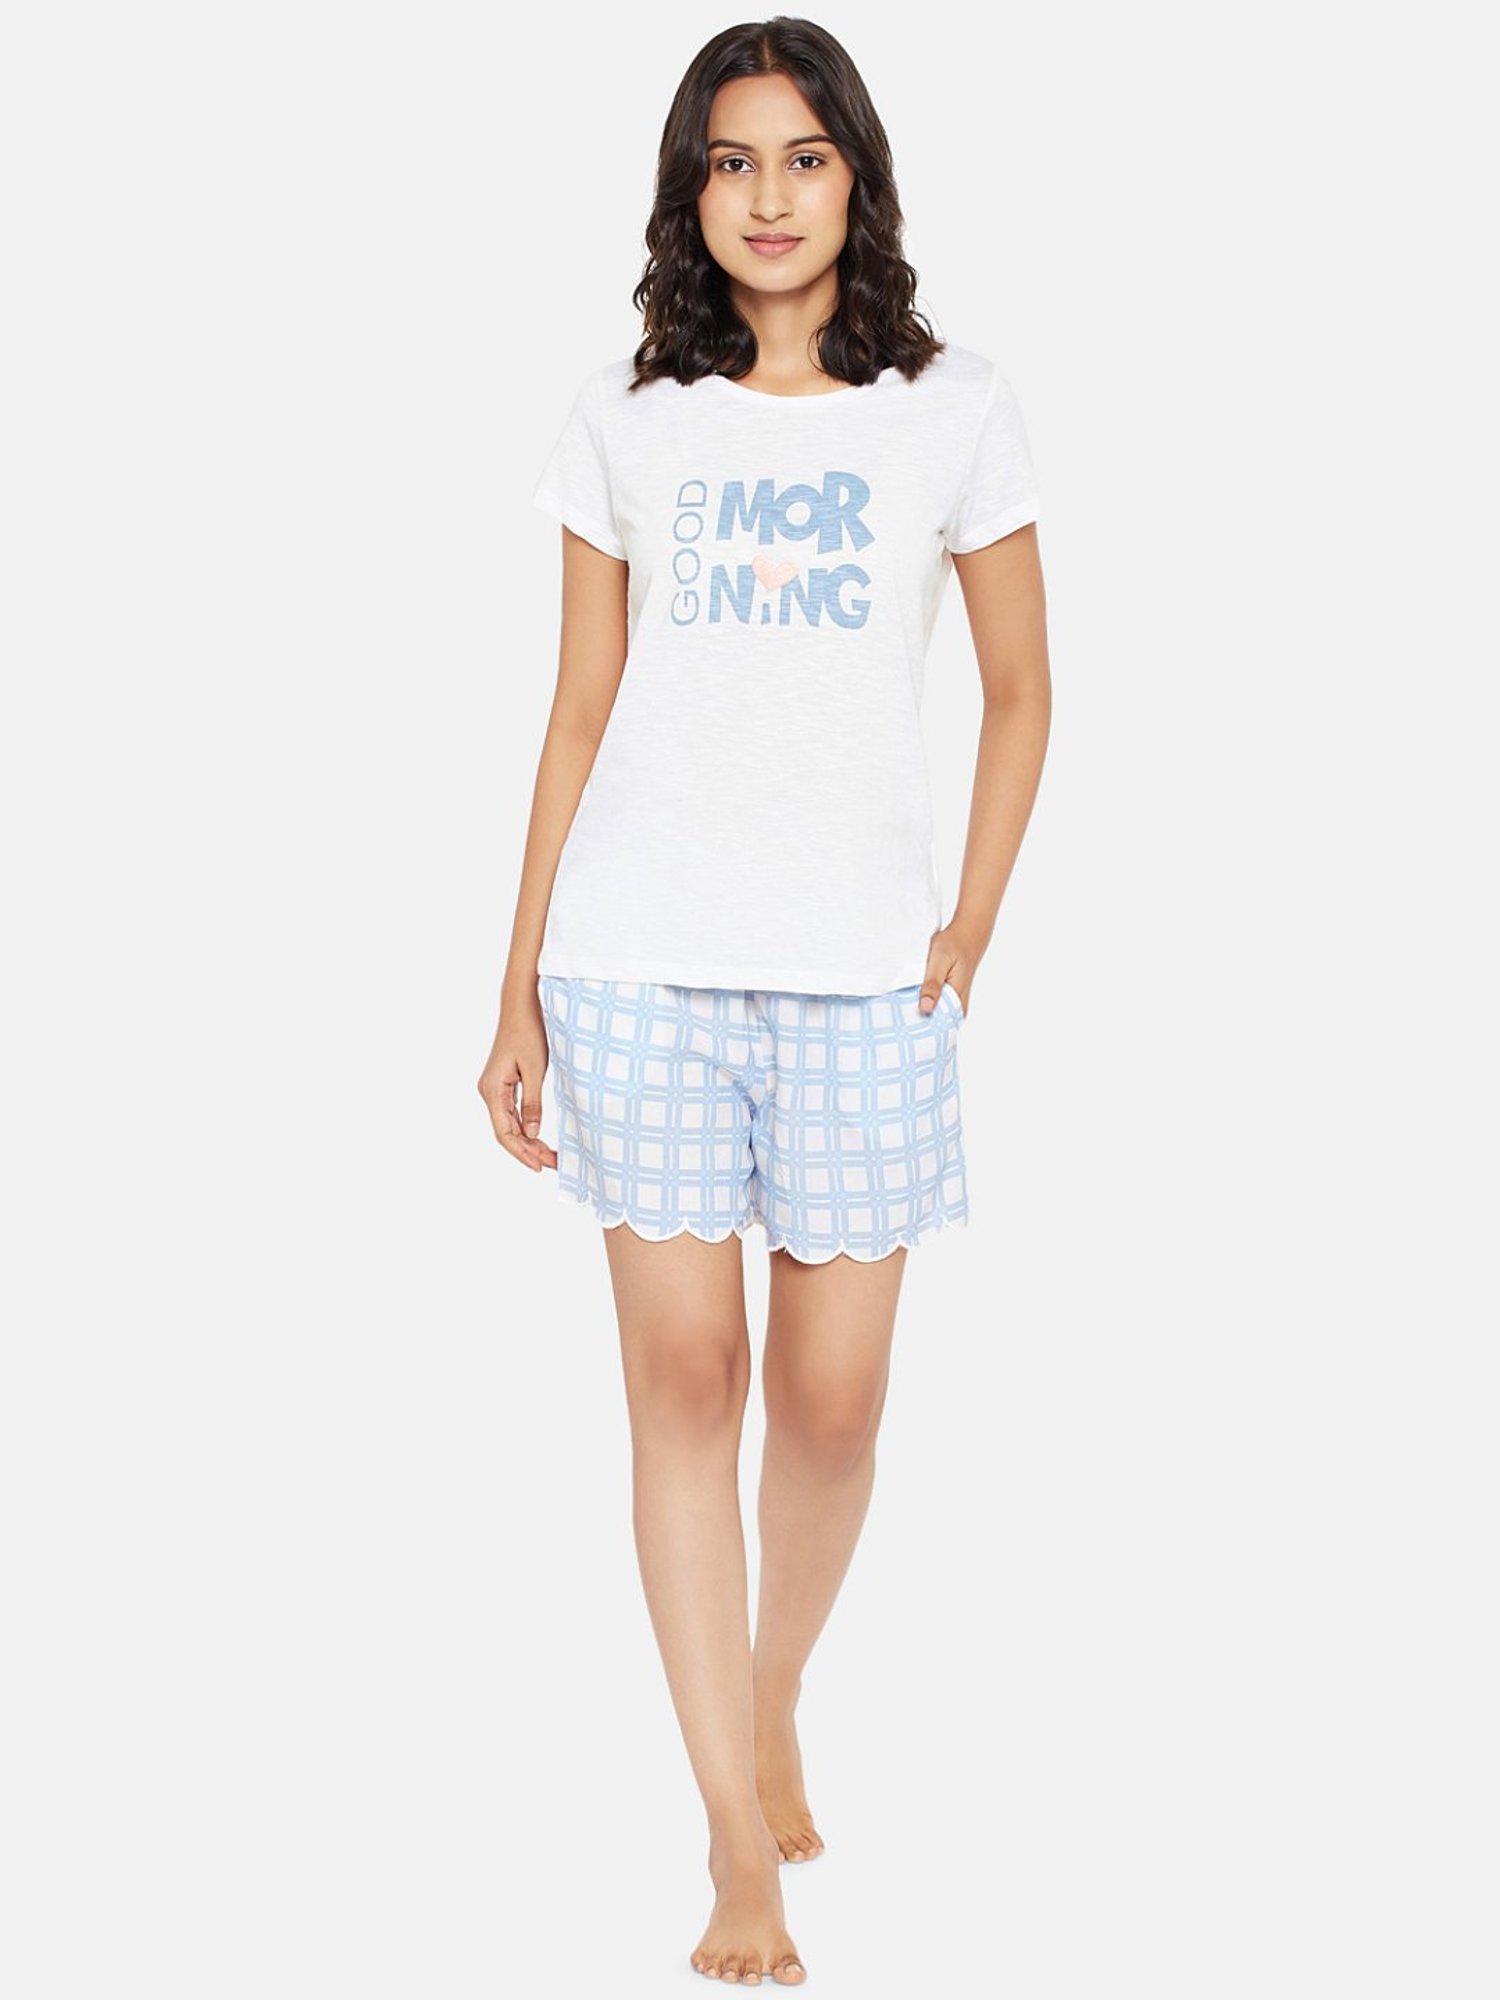 Dreamz by Pantaloons Grey White Cotton Chequered Top Shorts Set